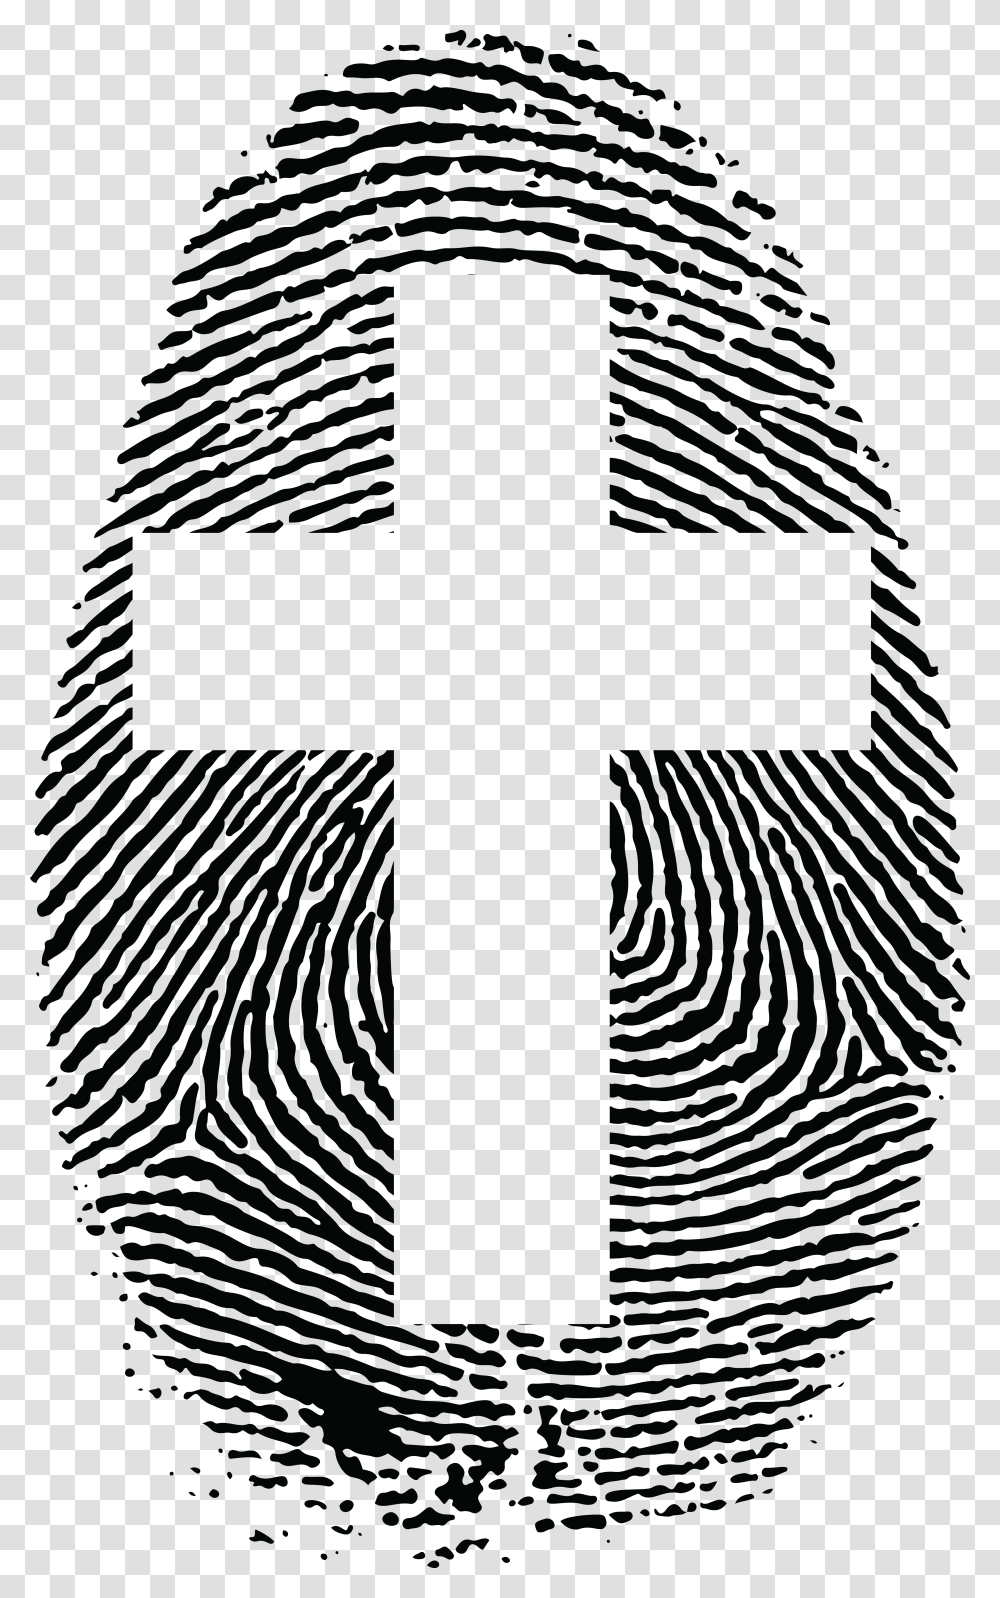 This Free Icons Design Of Cross Fingerprint, Crucifix, Silhouette Transparent Png